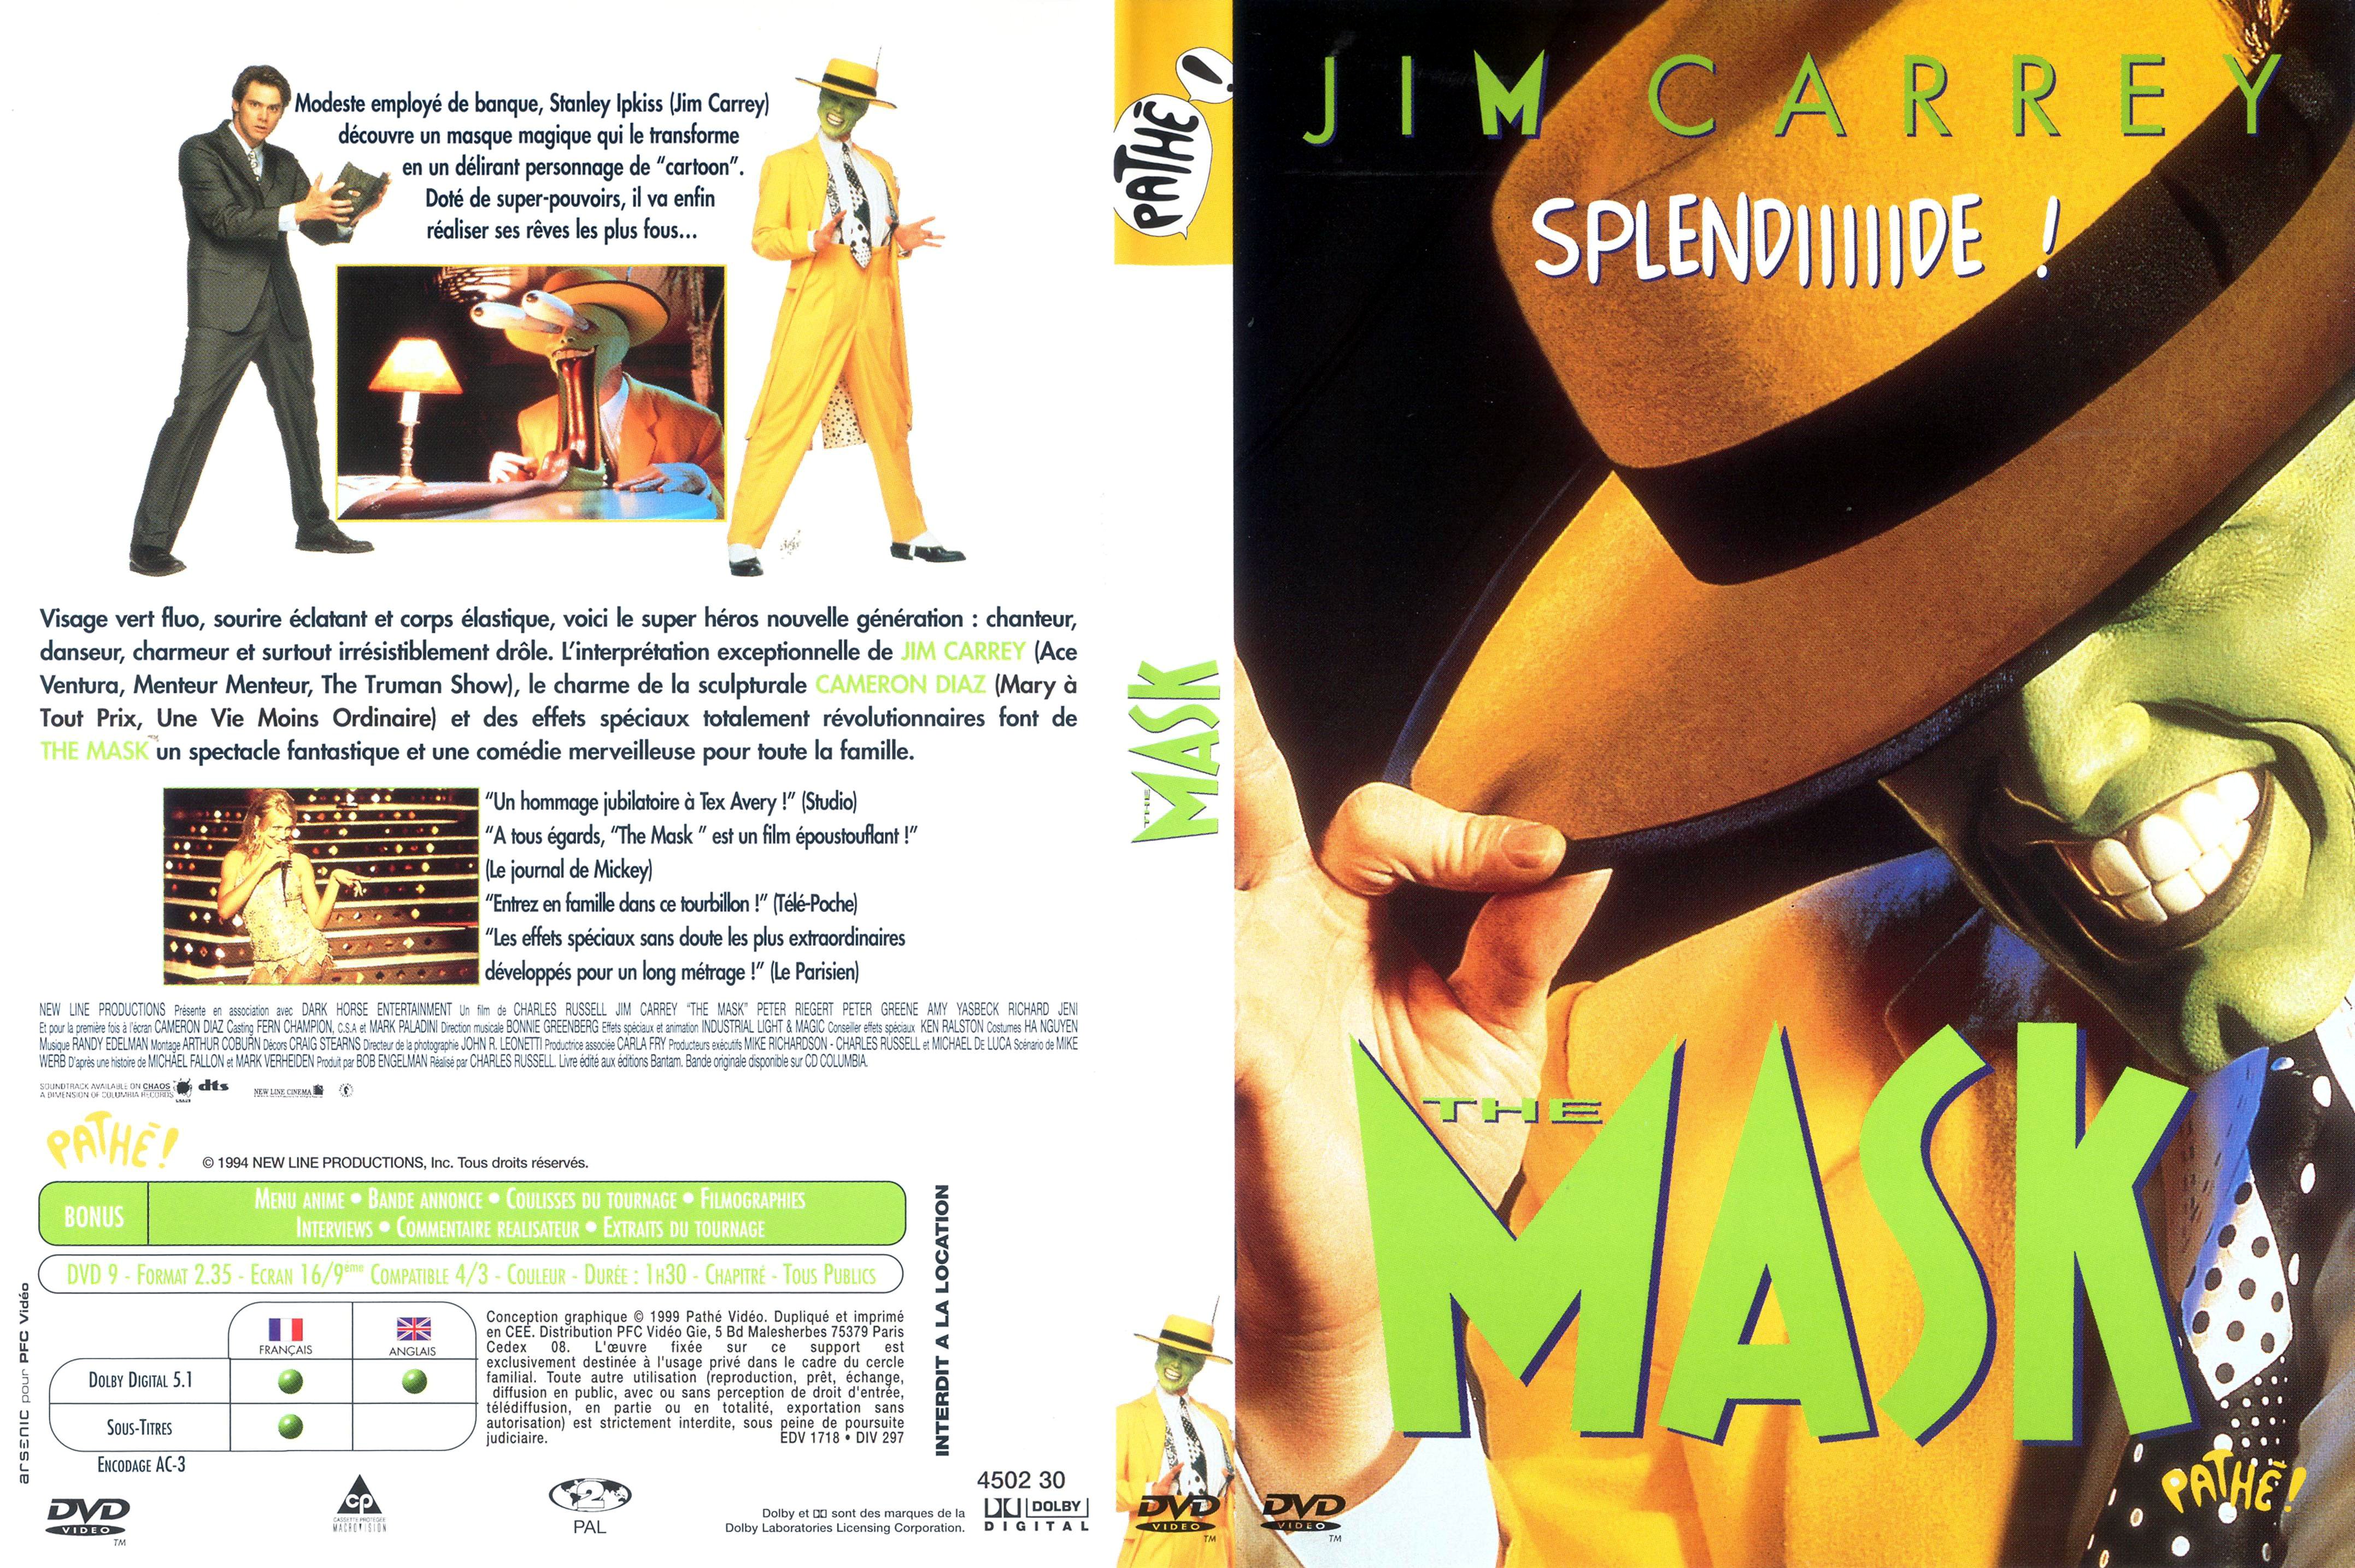 Jaquette DVD The mask